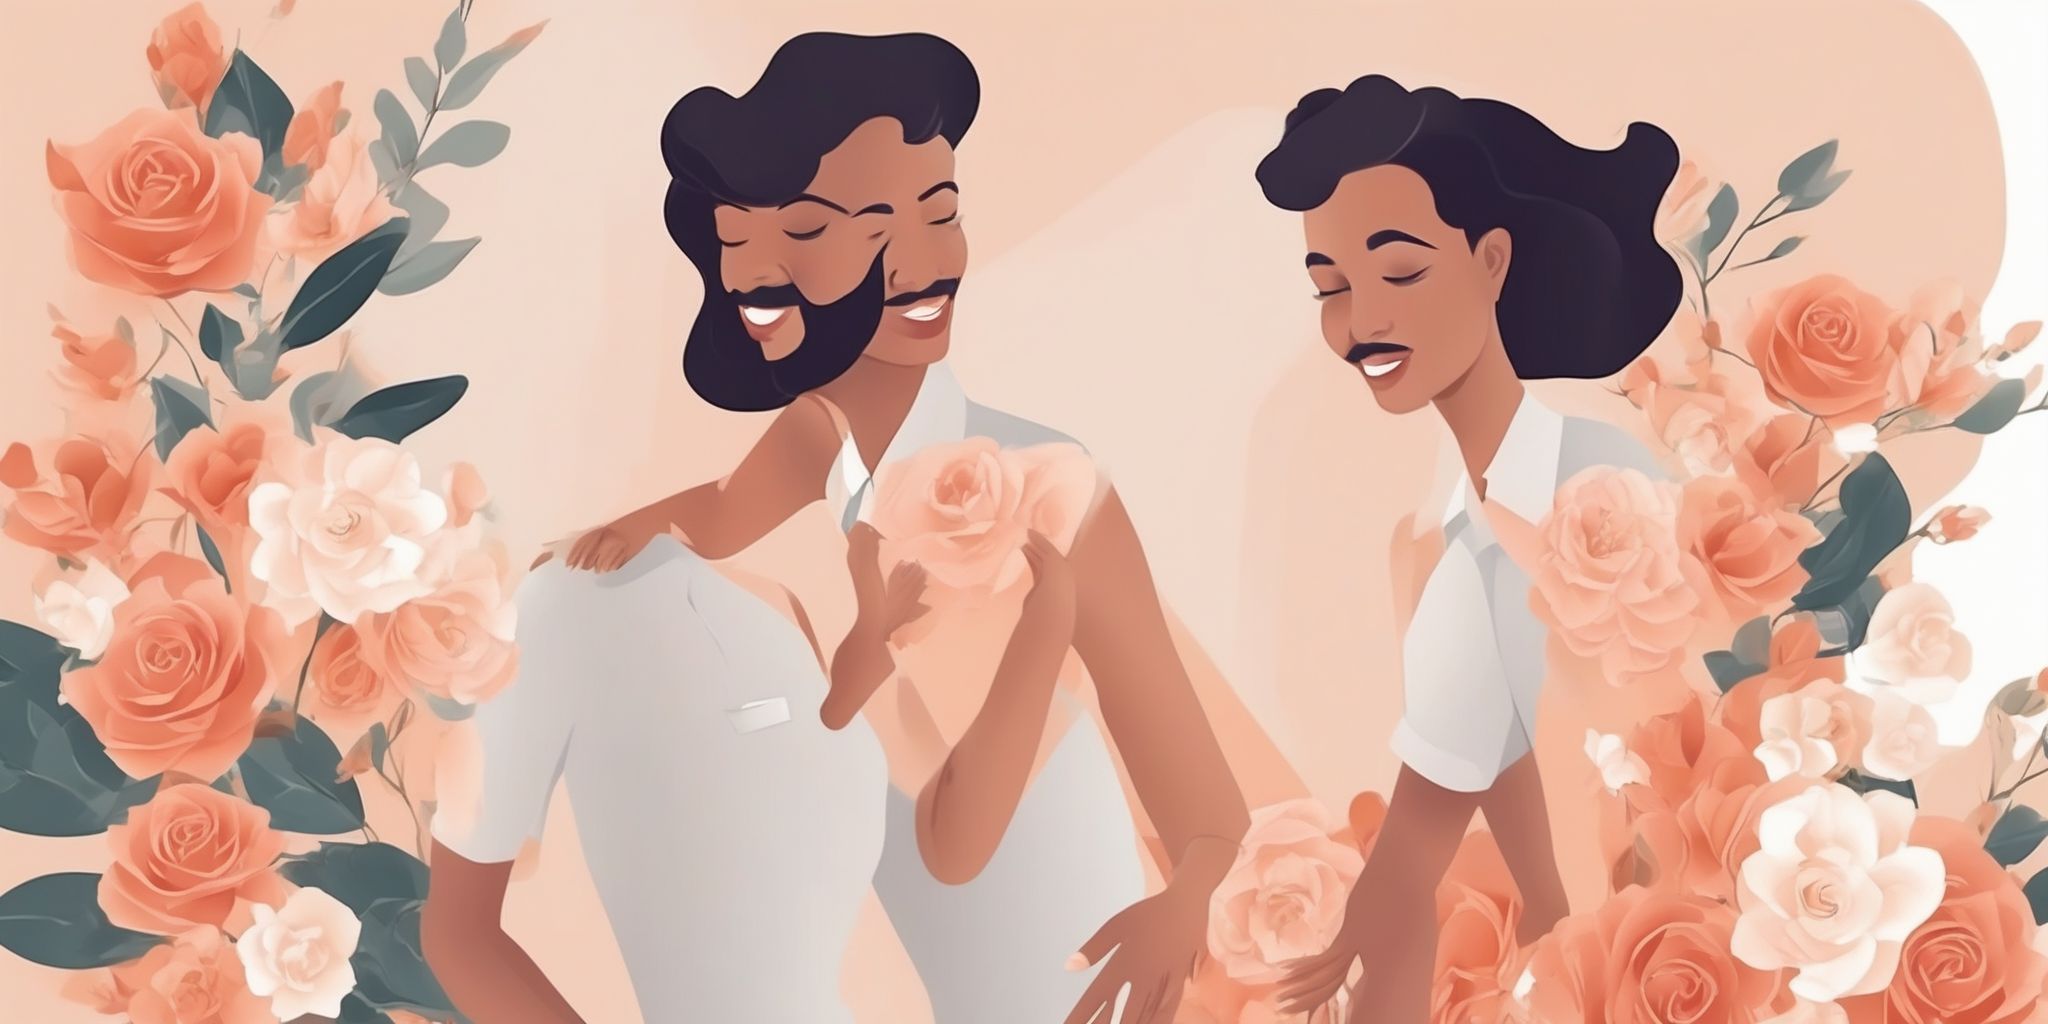 engagement in illustration style with gradients and white background